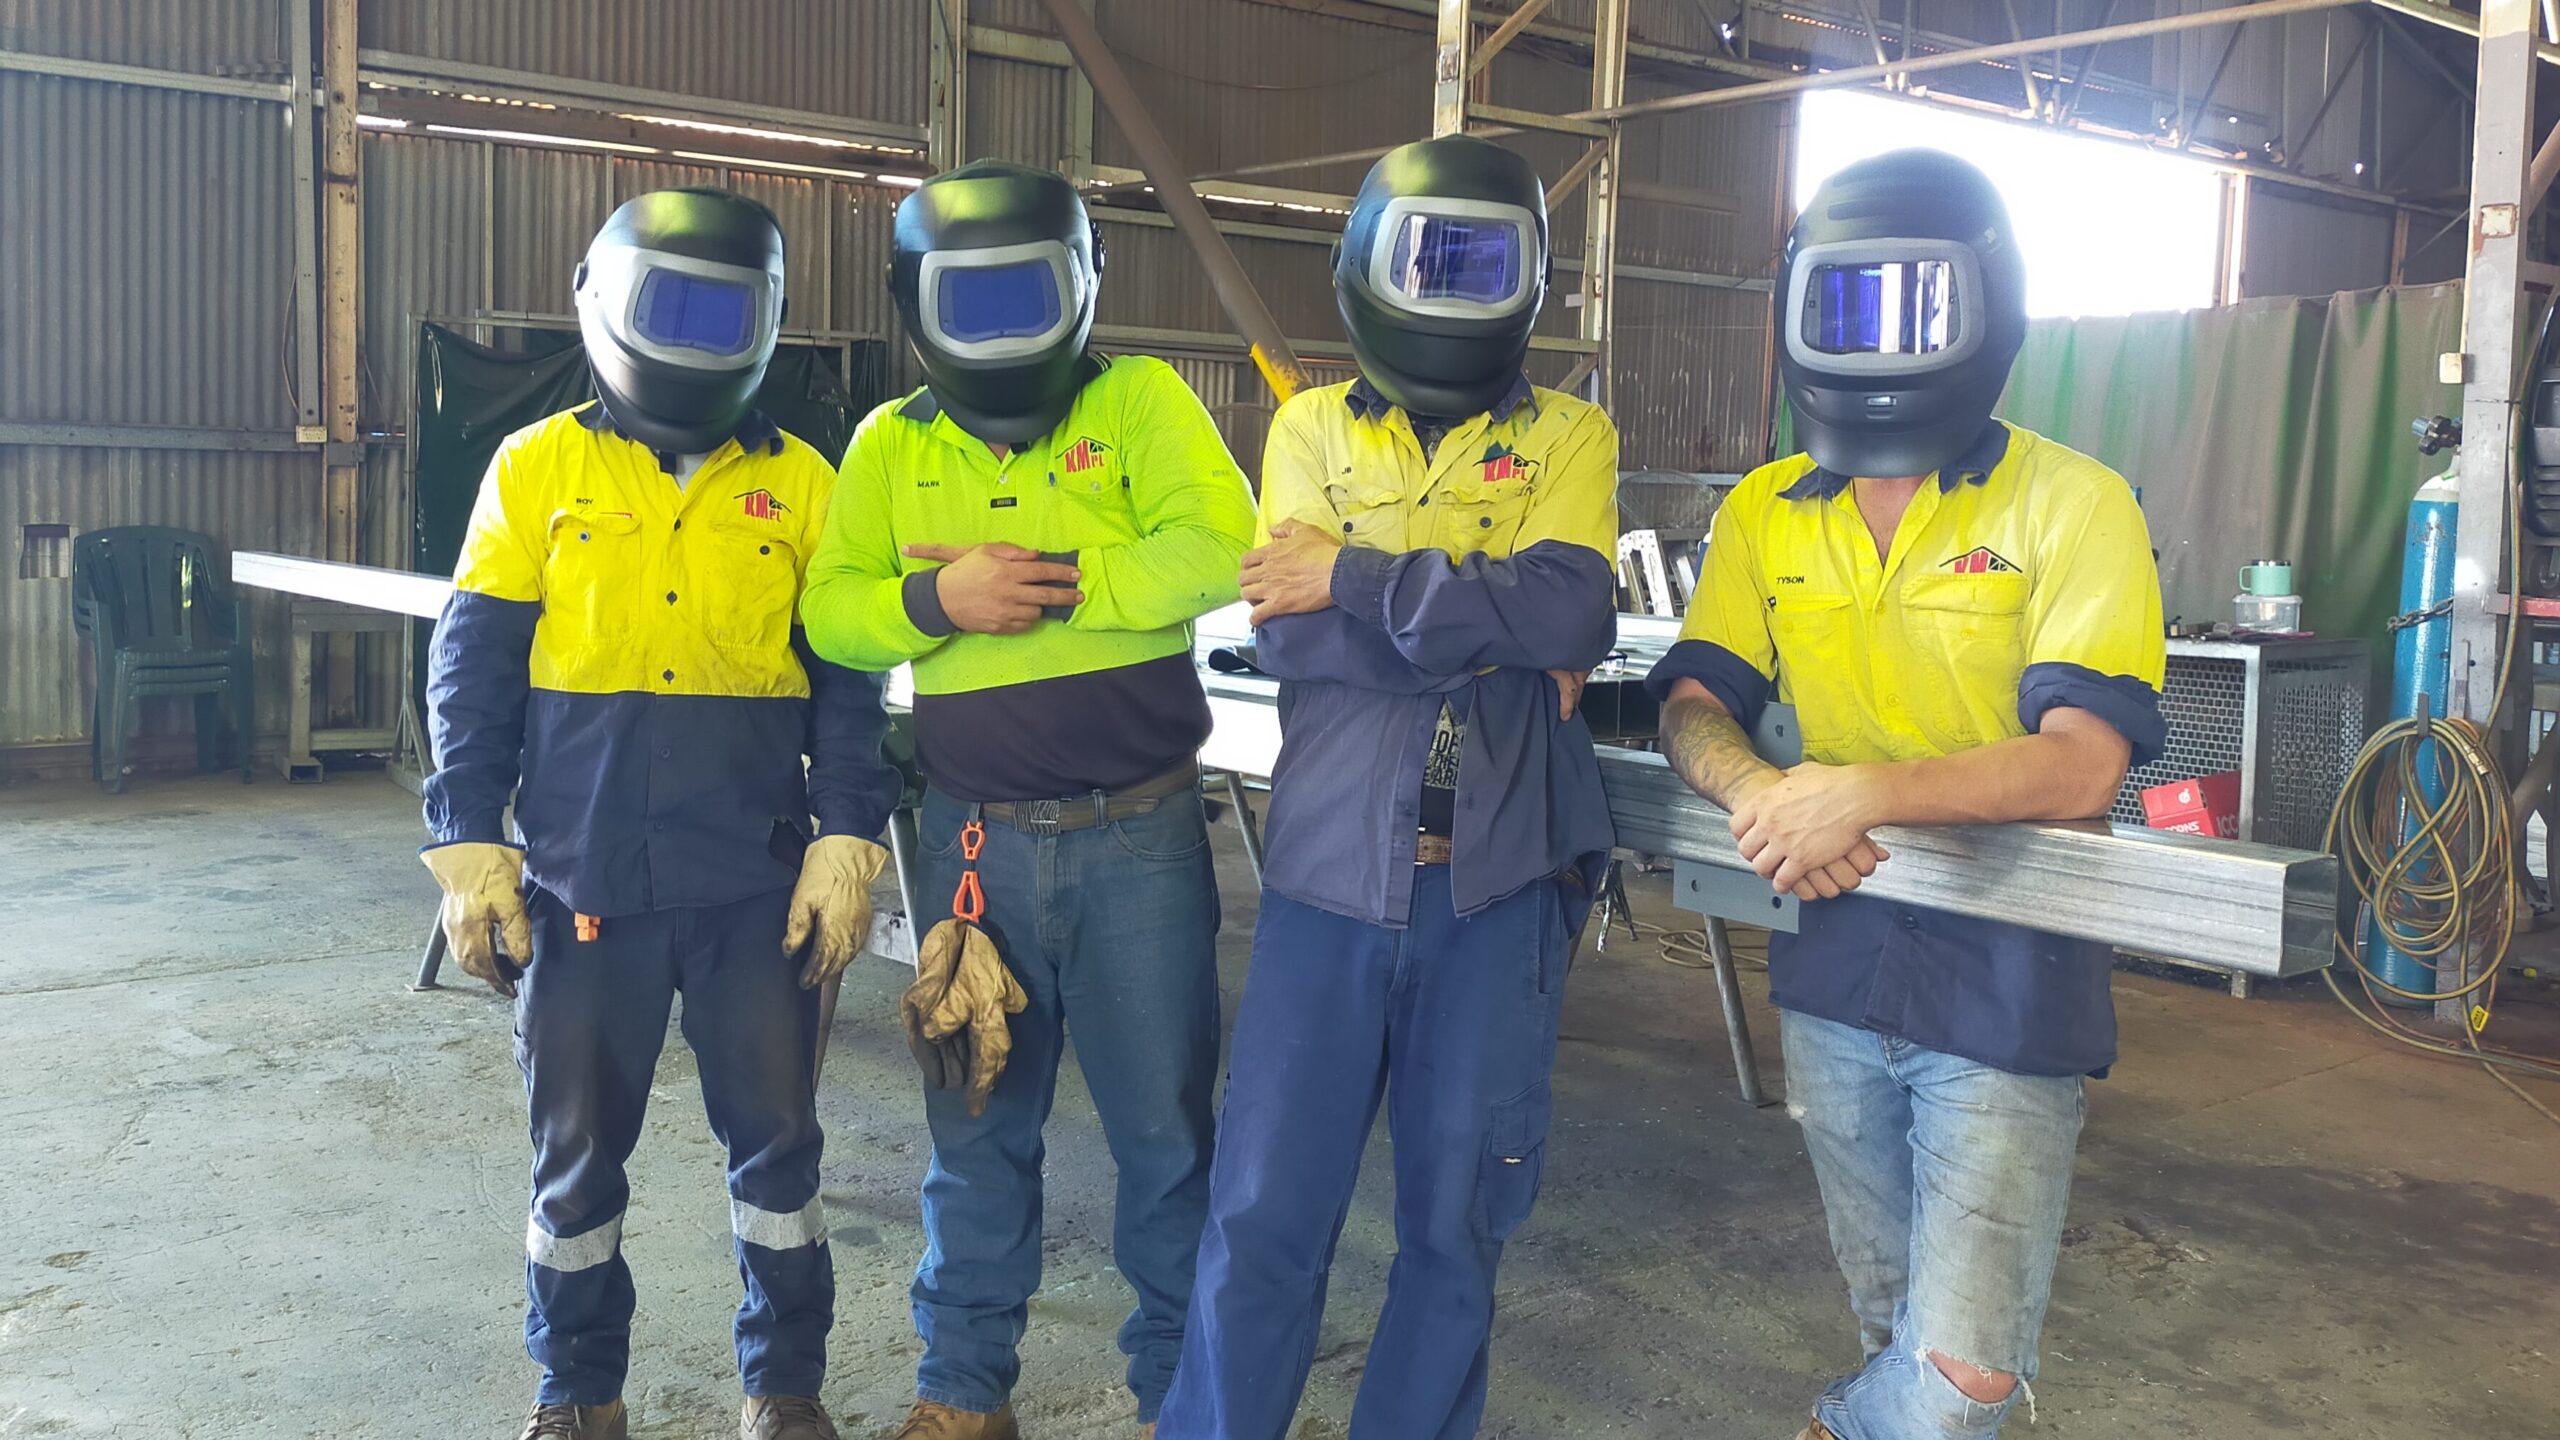 Our staff wearing new Speedglas helmets featuring integrated clear and smoked filters